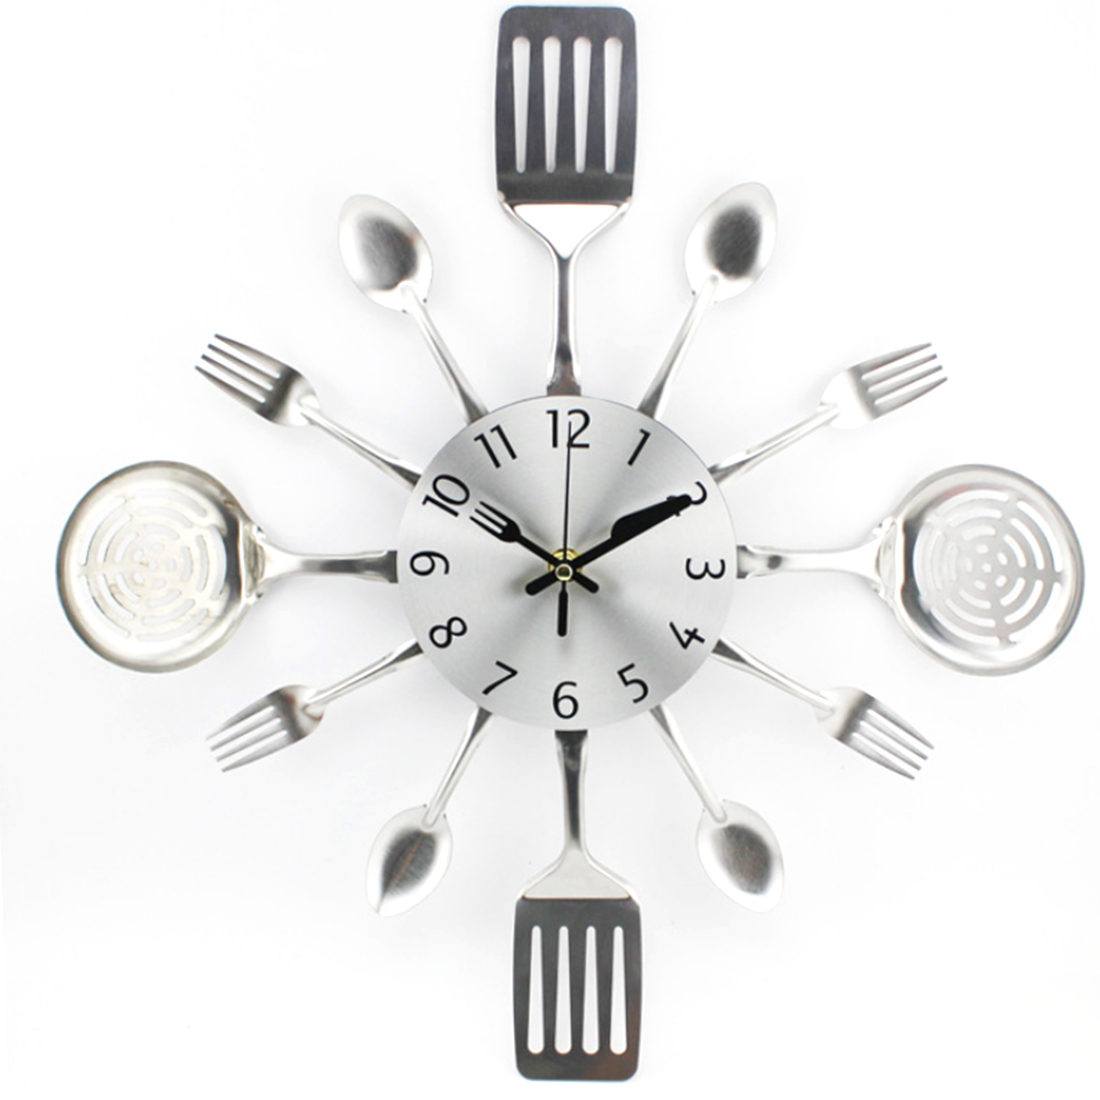 Kitchen Wall Clock 3d Unique Creative Mute Kitchen Utensils Toned Forks Spoons Spatulas Wall Clock Gift Silver Extra Large Wall Clocks Sale Floor Clocks From Daydaylife